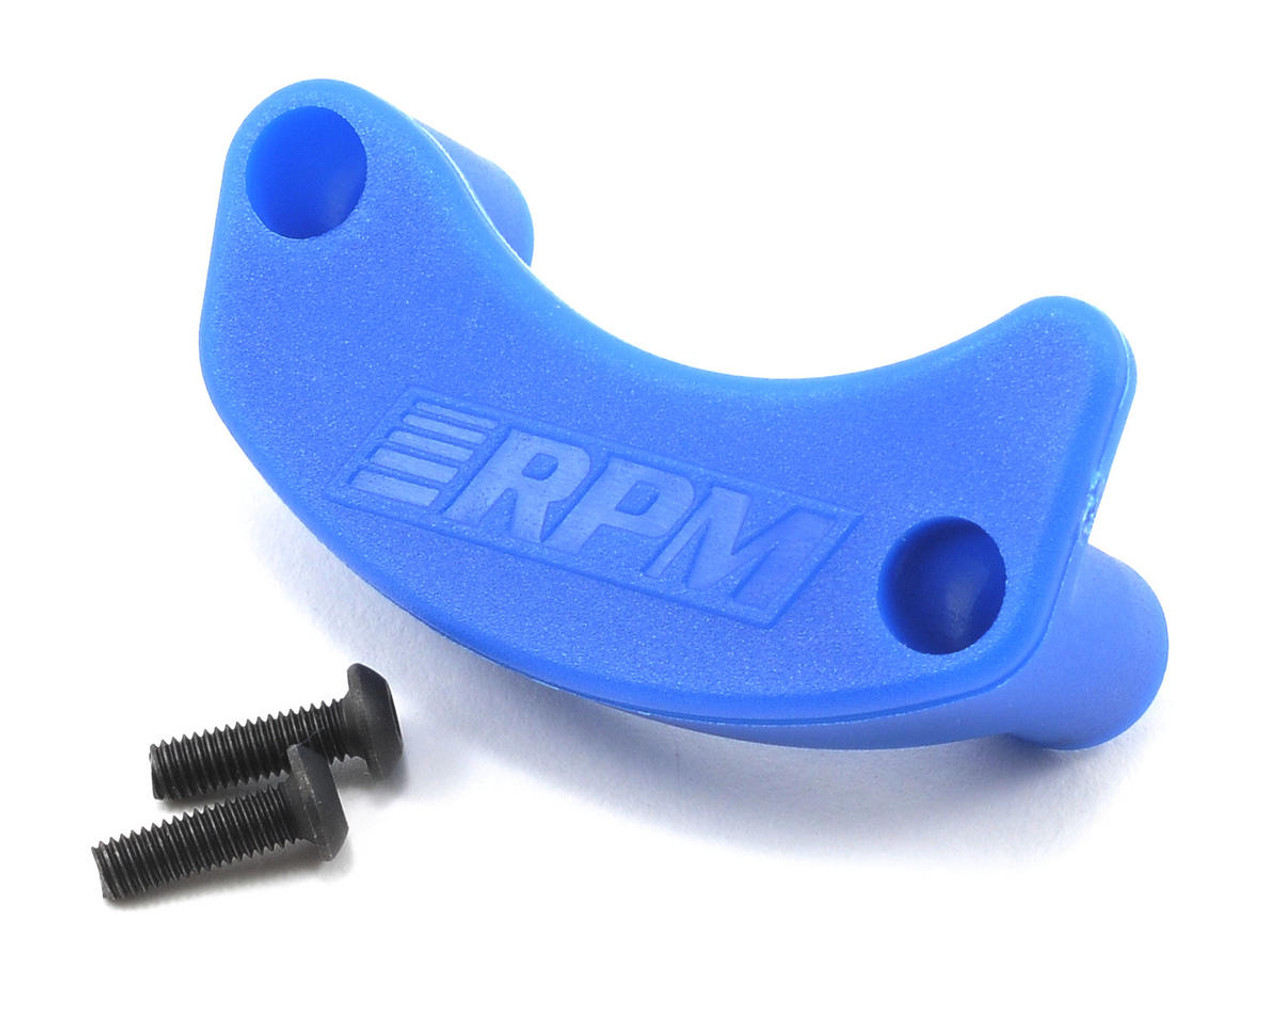 RPM 80915 Motor Protector, for Traxxas, Blue